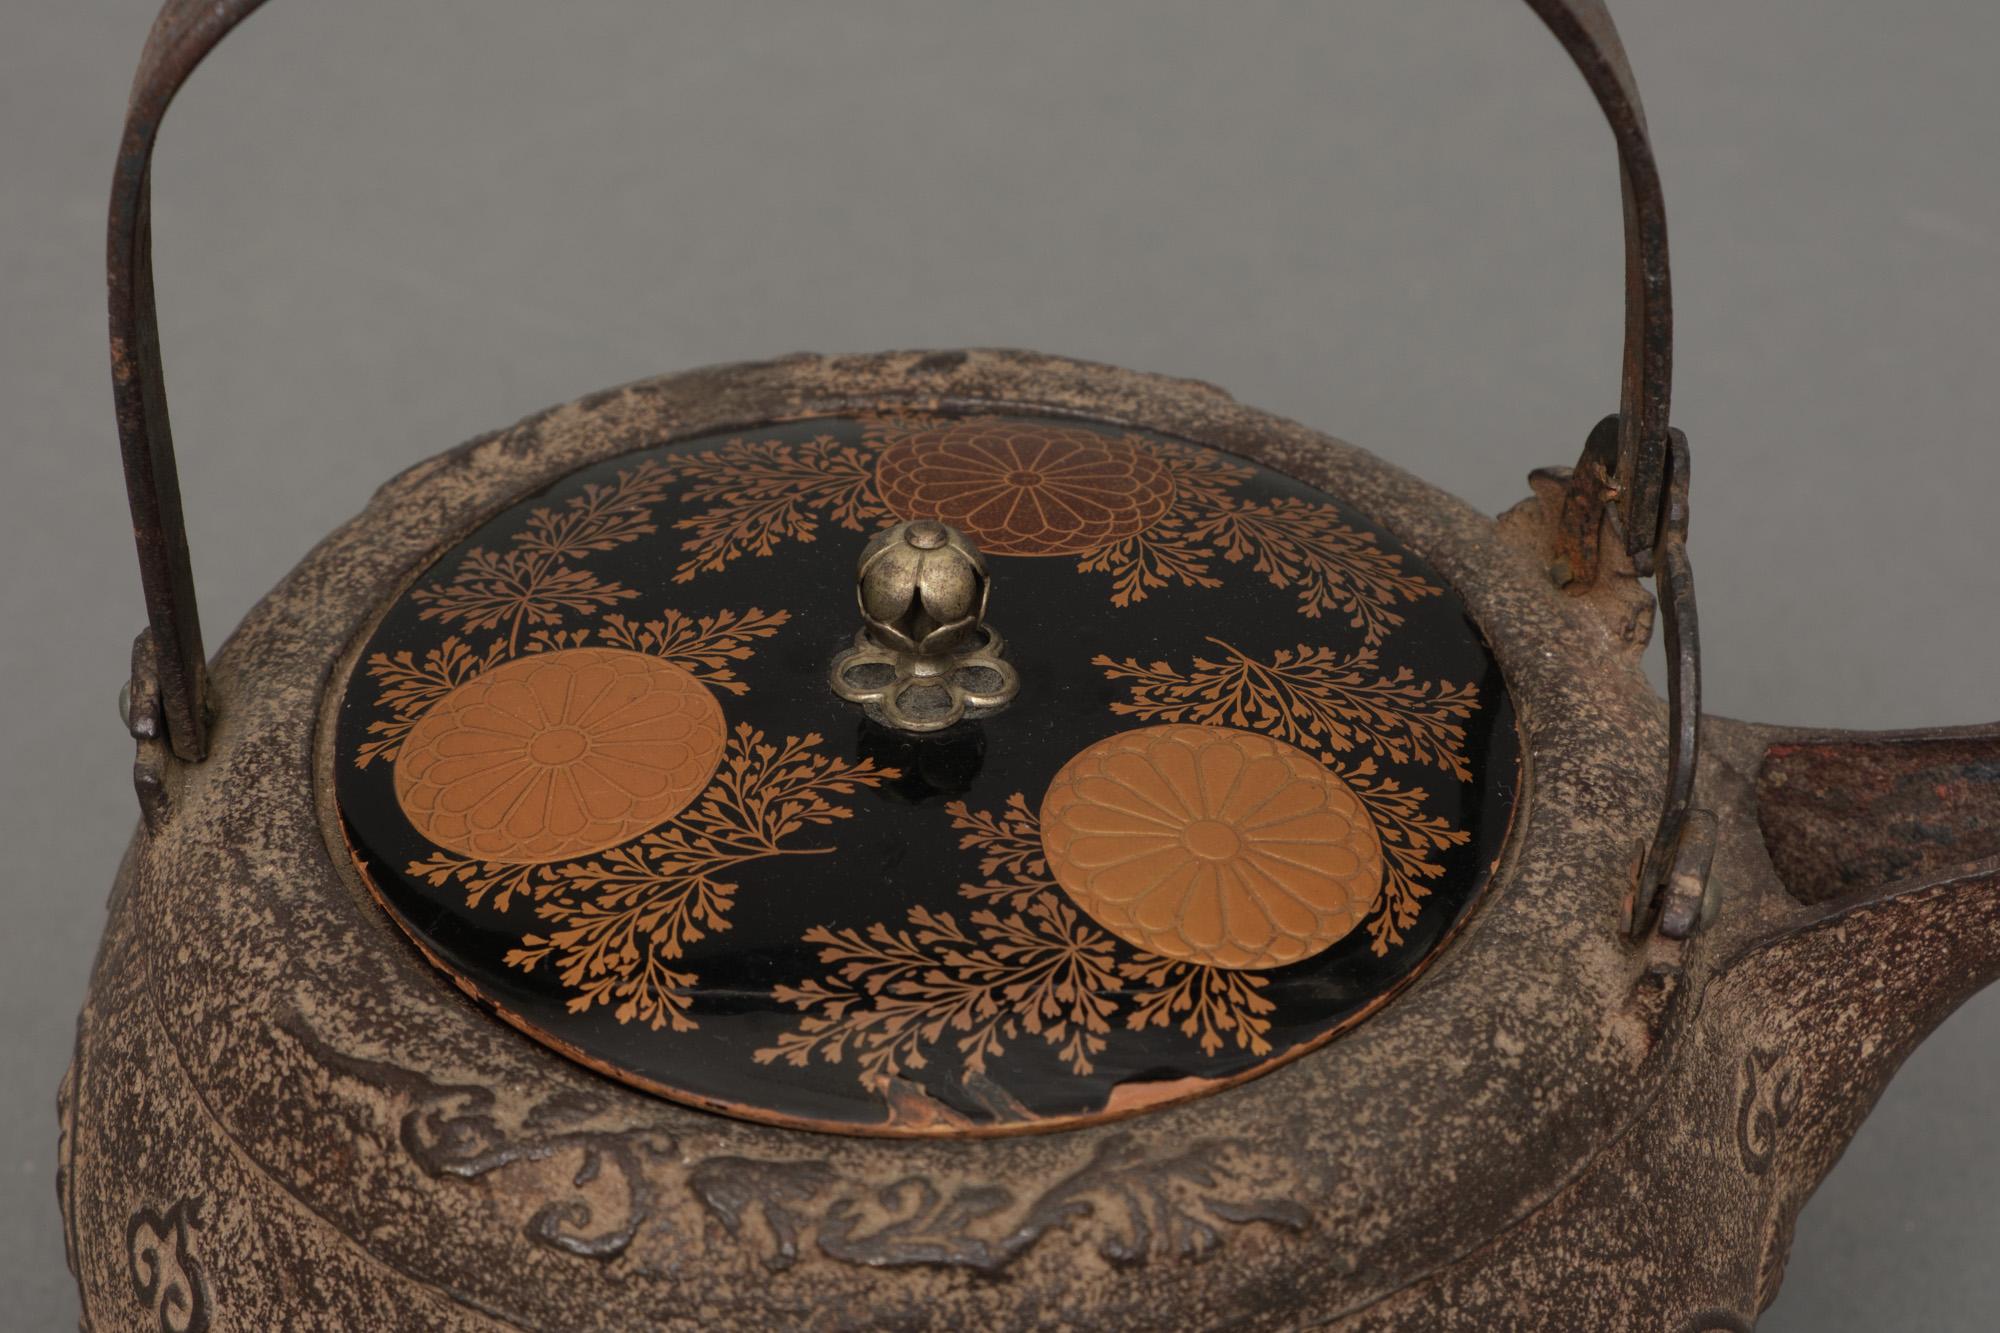 Pair of enticing cast iron chôshi (sake kettles) with a detailed lacquered lid, raised by three low feet. Its rotund body with a subtle embossed design of stylized symbols, like mythical creatures in cartouches, Buddhist flames and chrysanthemum